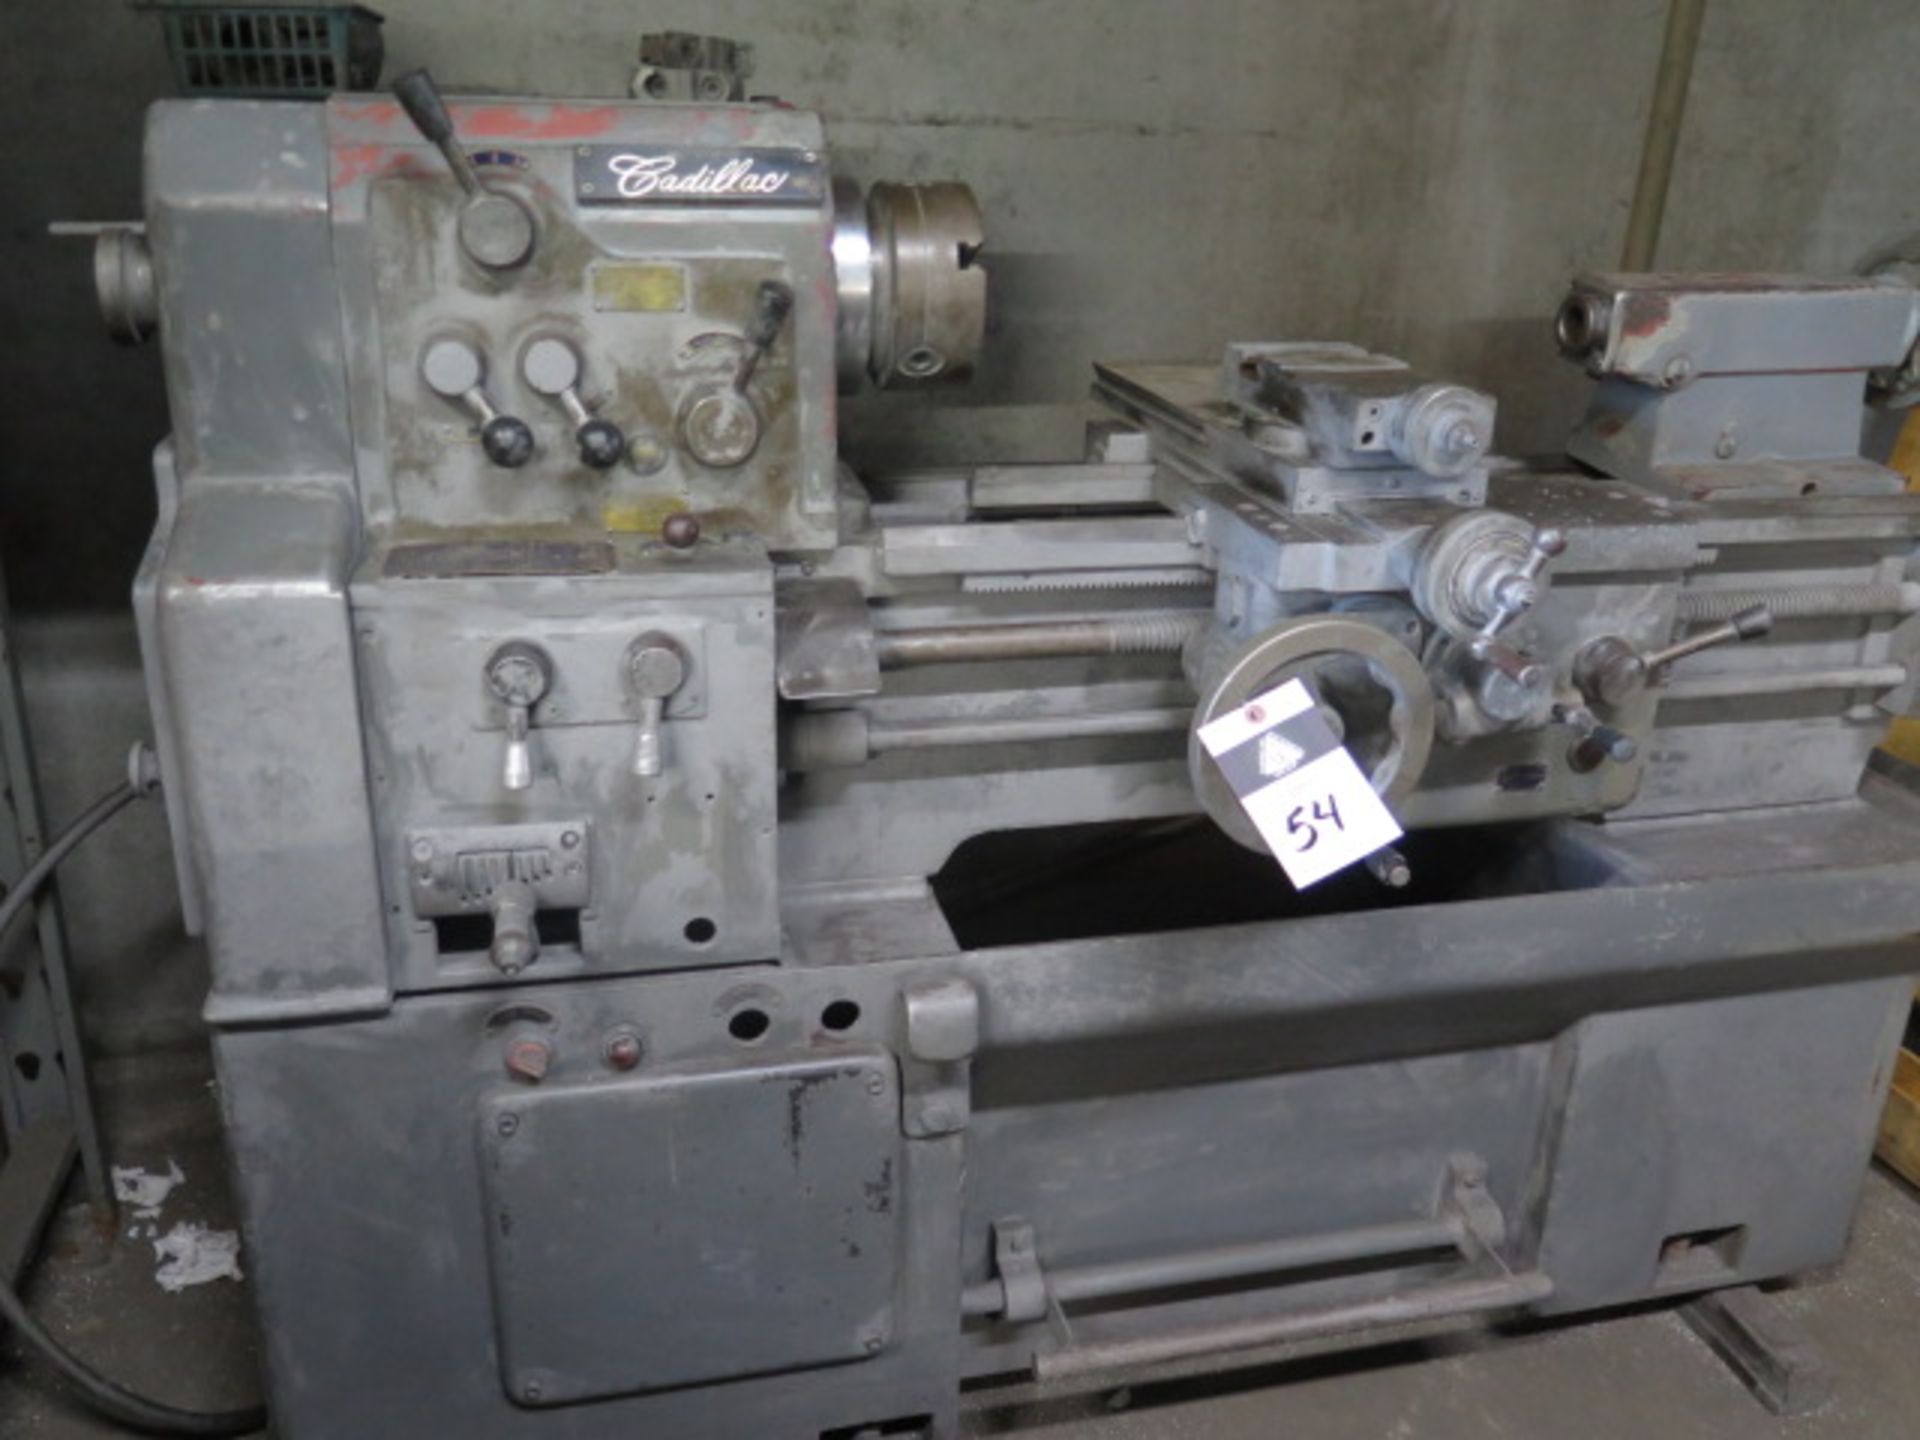 Cadillac 13” x 24” Geared Head Gap Bed Lathe w/ 83-1800 RPM, Inch Threading, Tailstock, SOLD AS IS - Image 3 of 9